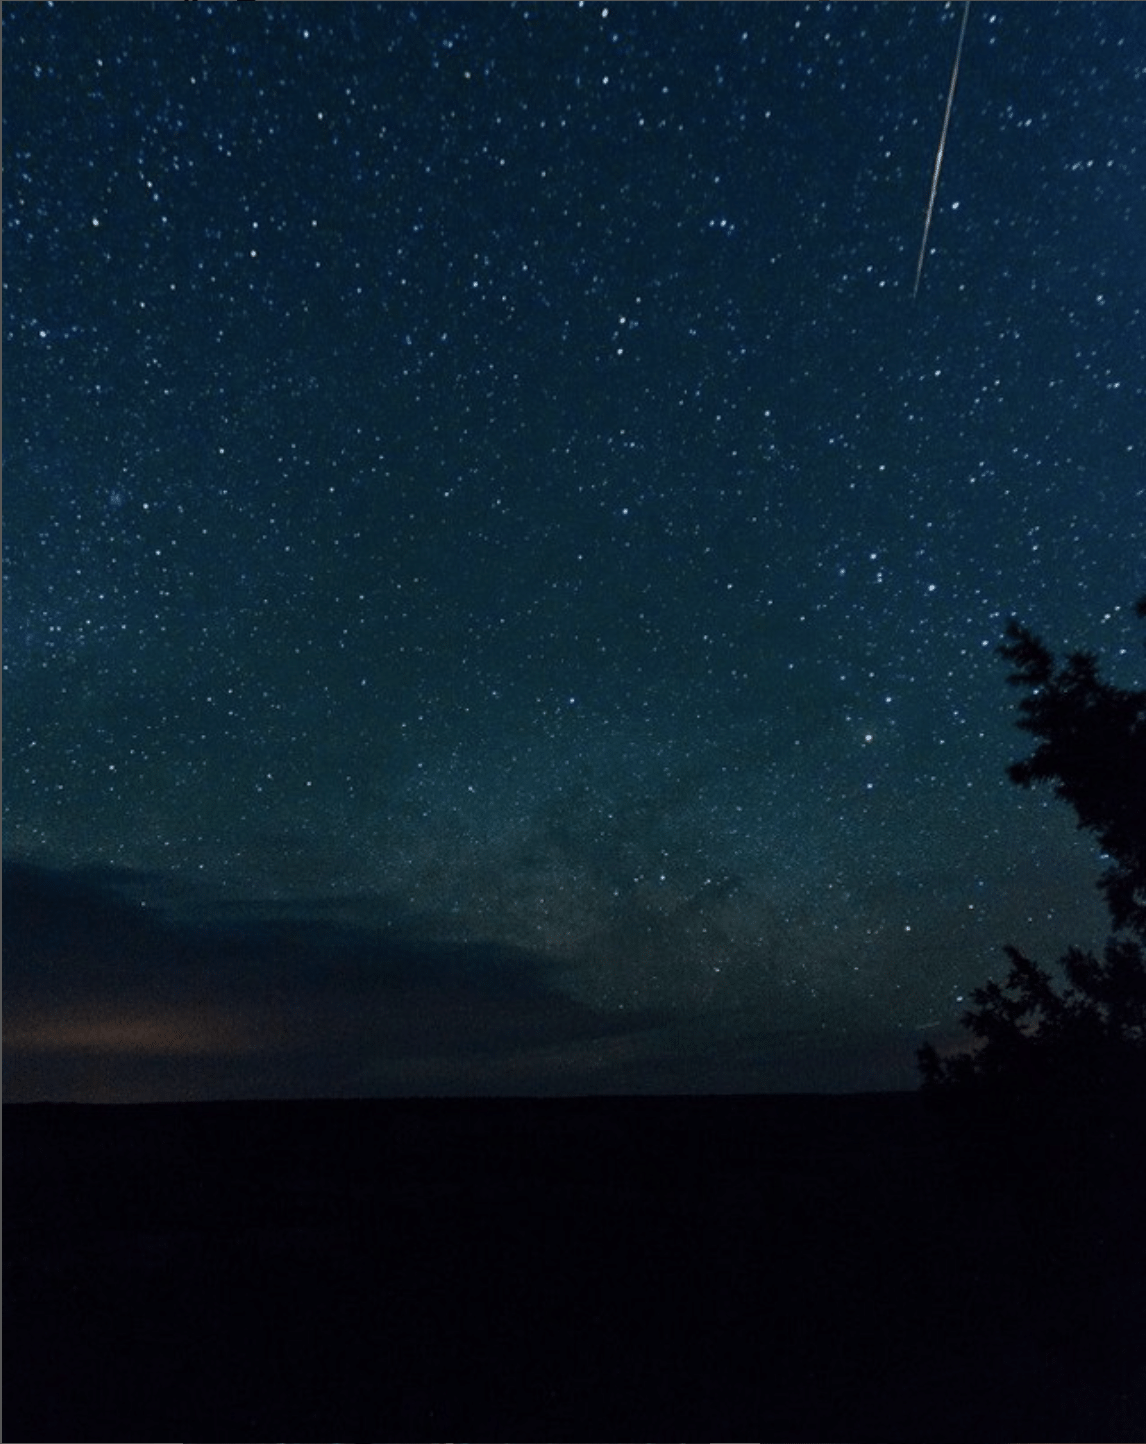 Eta Aquarids: Recording of meteor showers from Halley's Comet in Arizona/US - Charles Byrne